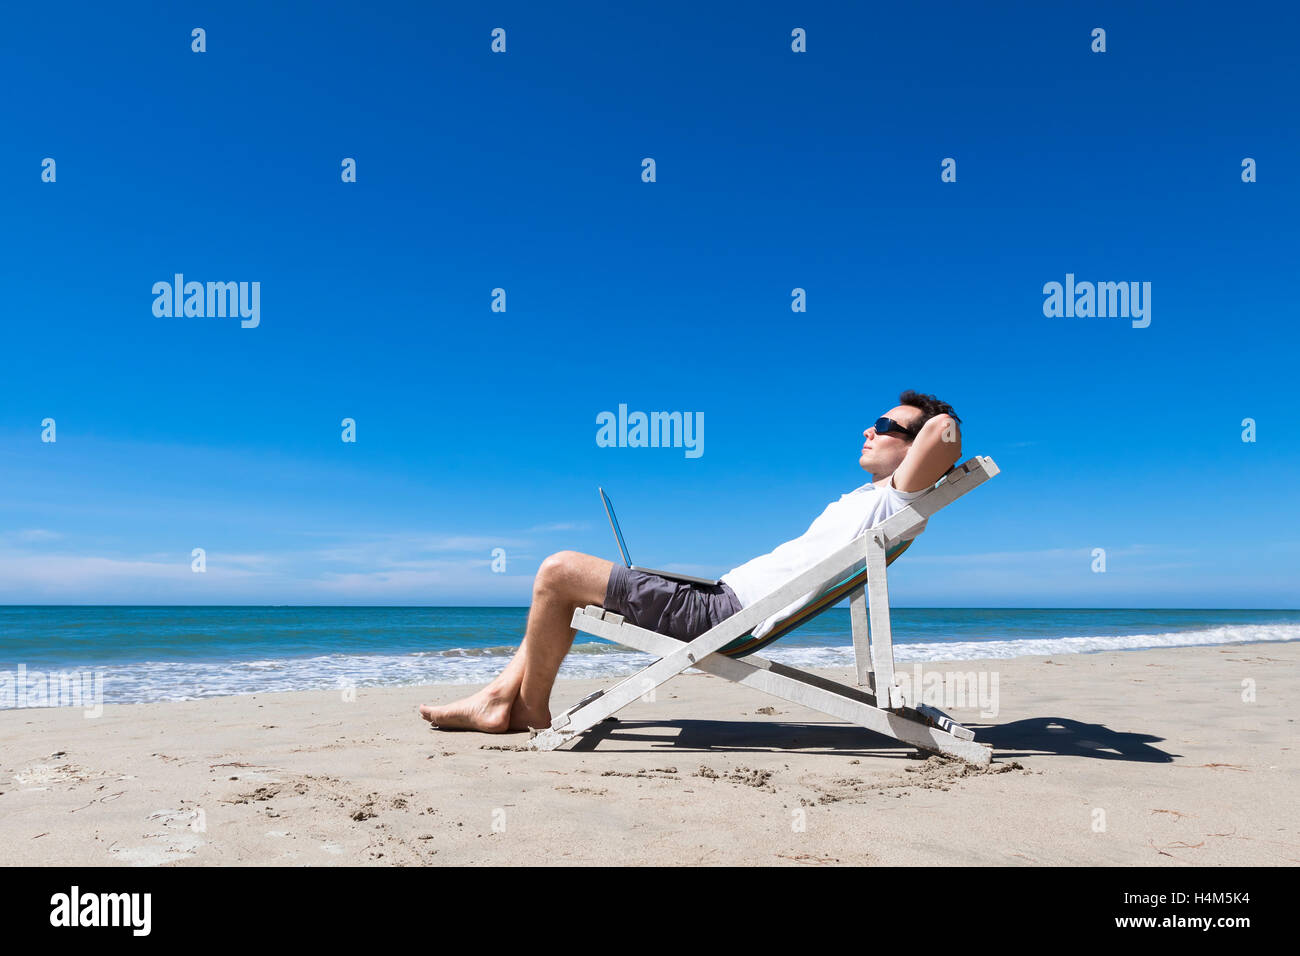 Freelancer working remotely with laptop and resting on sunny tropical beach, sunglasses Stock Photo